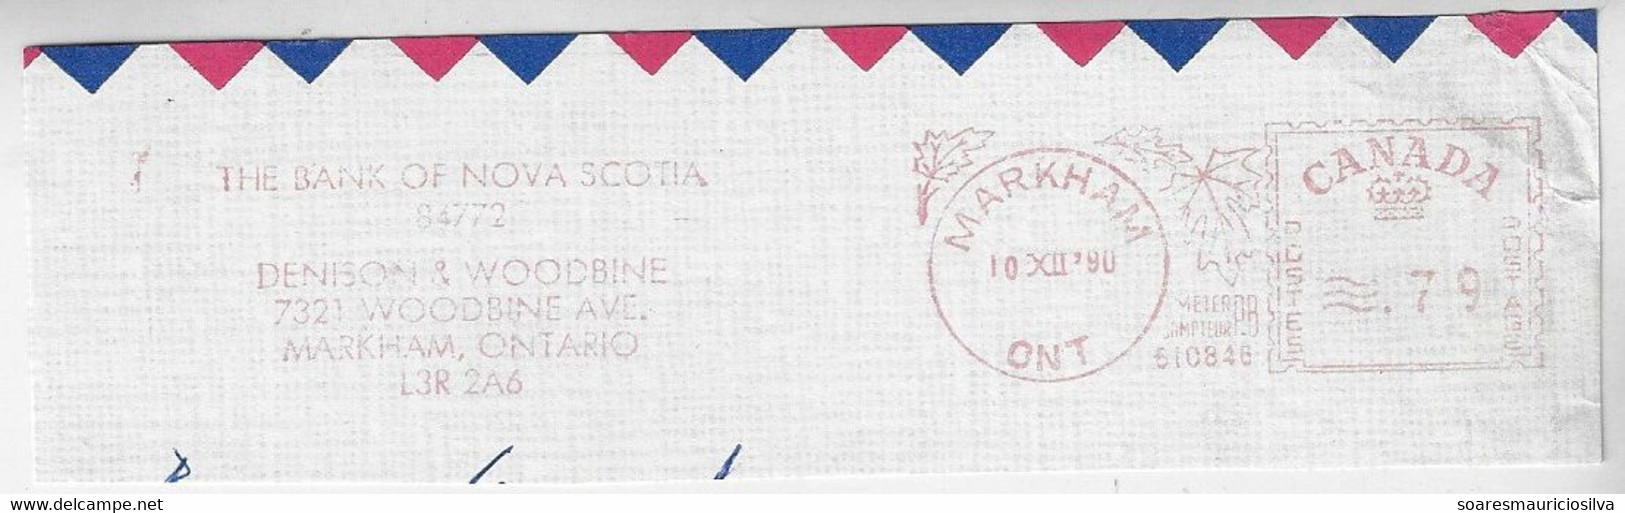 Canada 1990 Fragment Cover Meter Stamp Pitney Bowes 5300 Maple Leaf Ornaments Slogan Bank Of Nova Scotia In Markham - Storia Postale